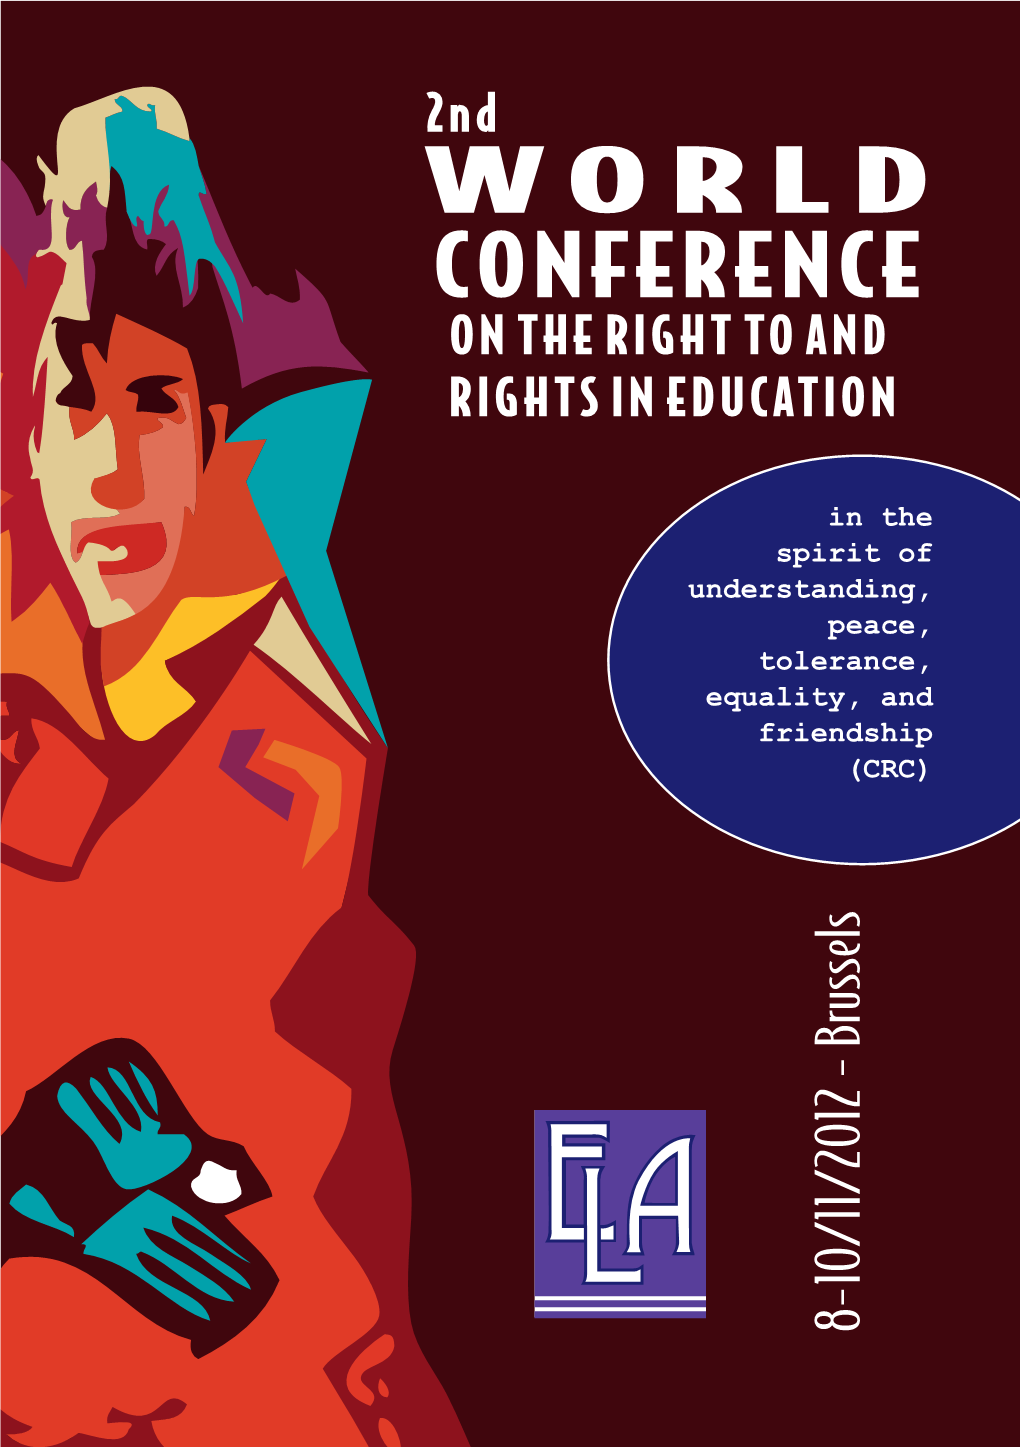 World Conference on the Right to Education and Rights in Education 8-10/11/2012 - Brussels